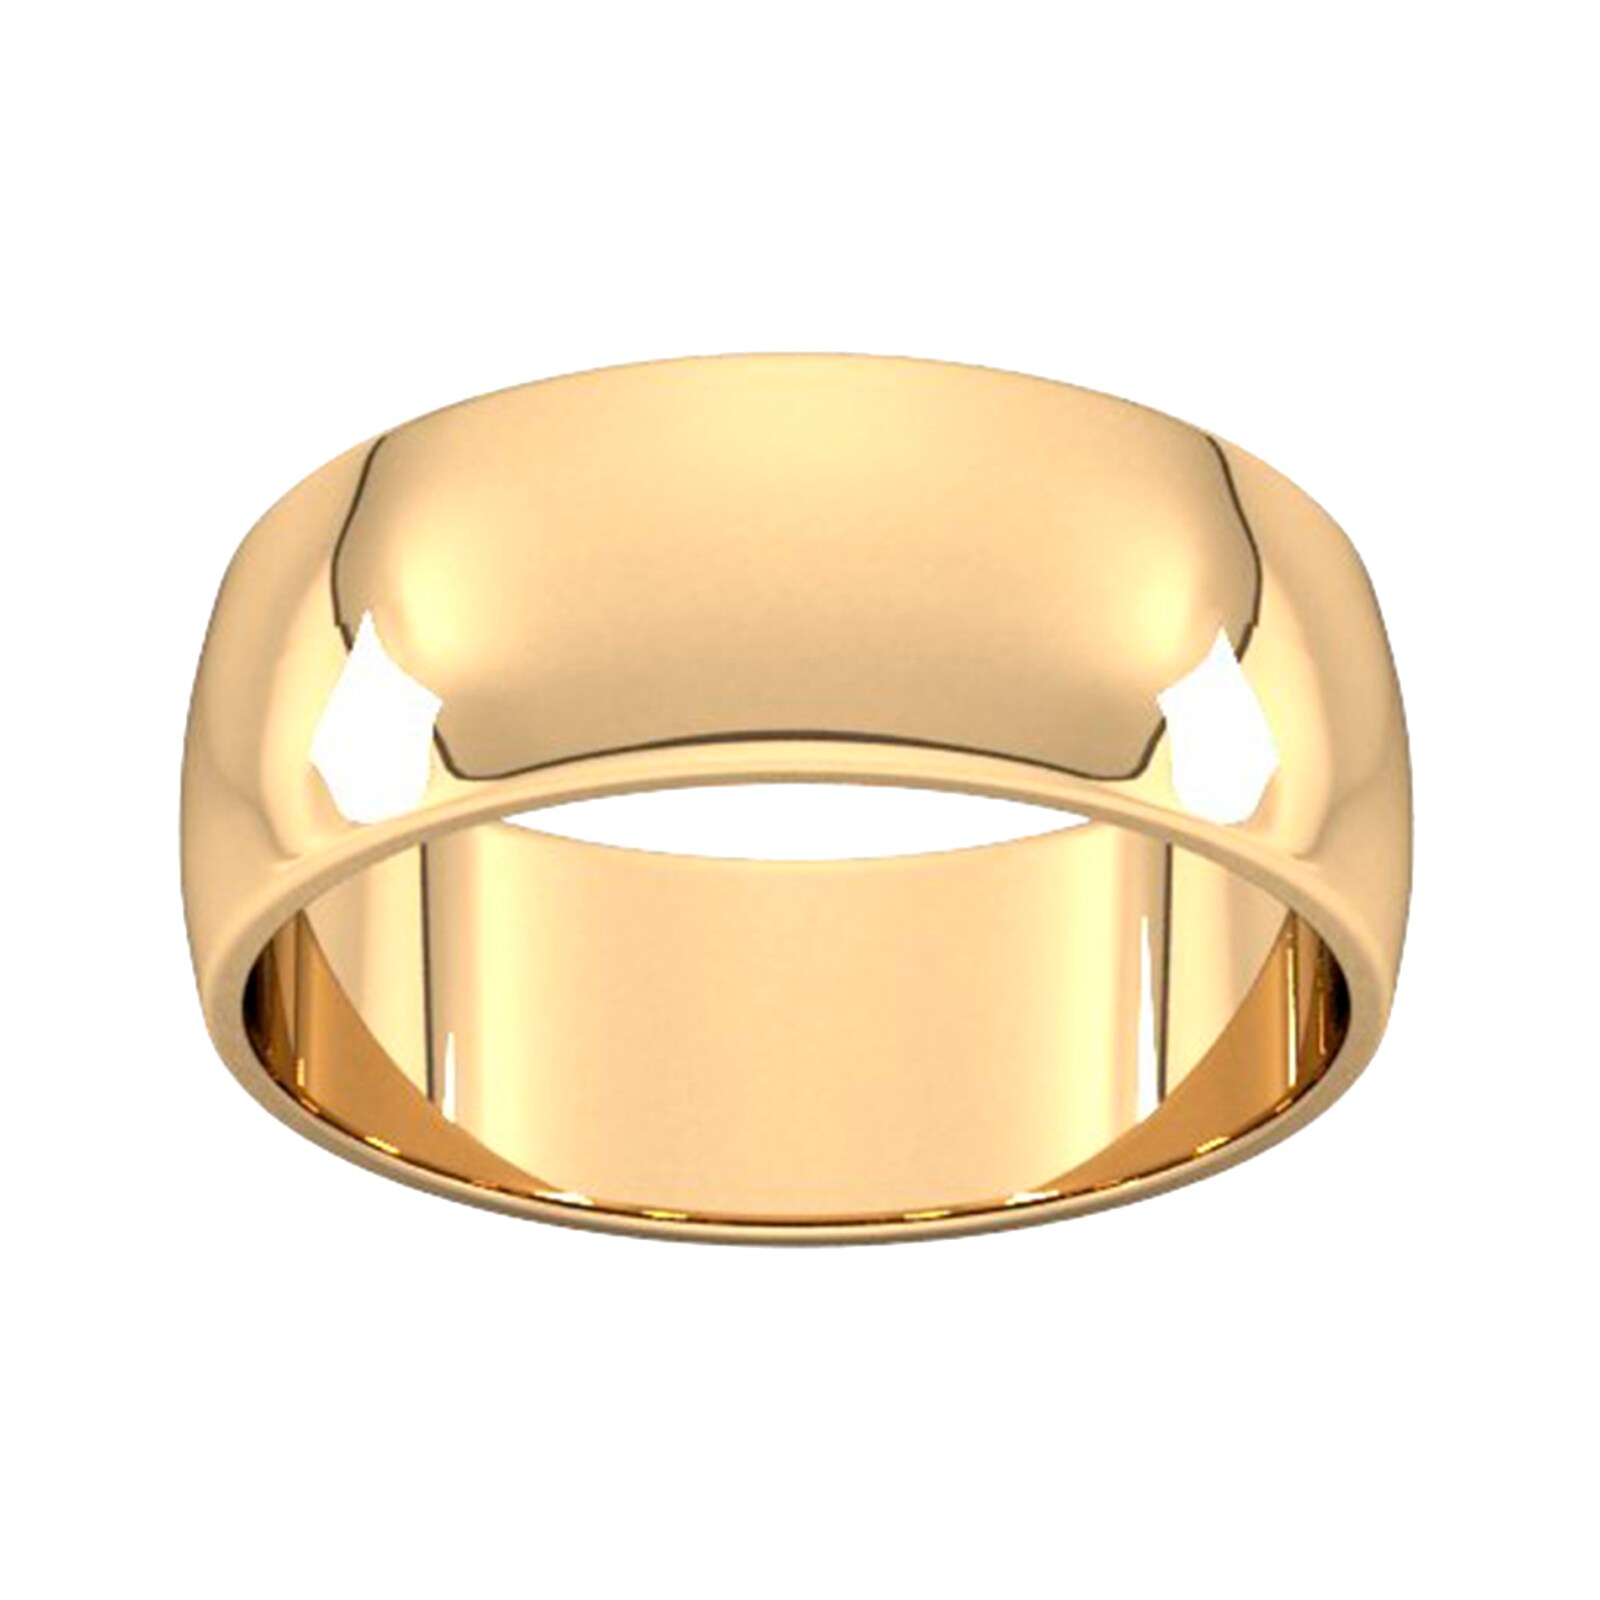 8mm D Shape Standard Wedding Ring In 9 Carat Yellow Gold - Ring Size T